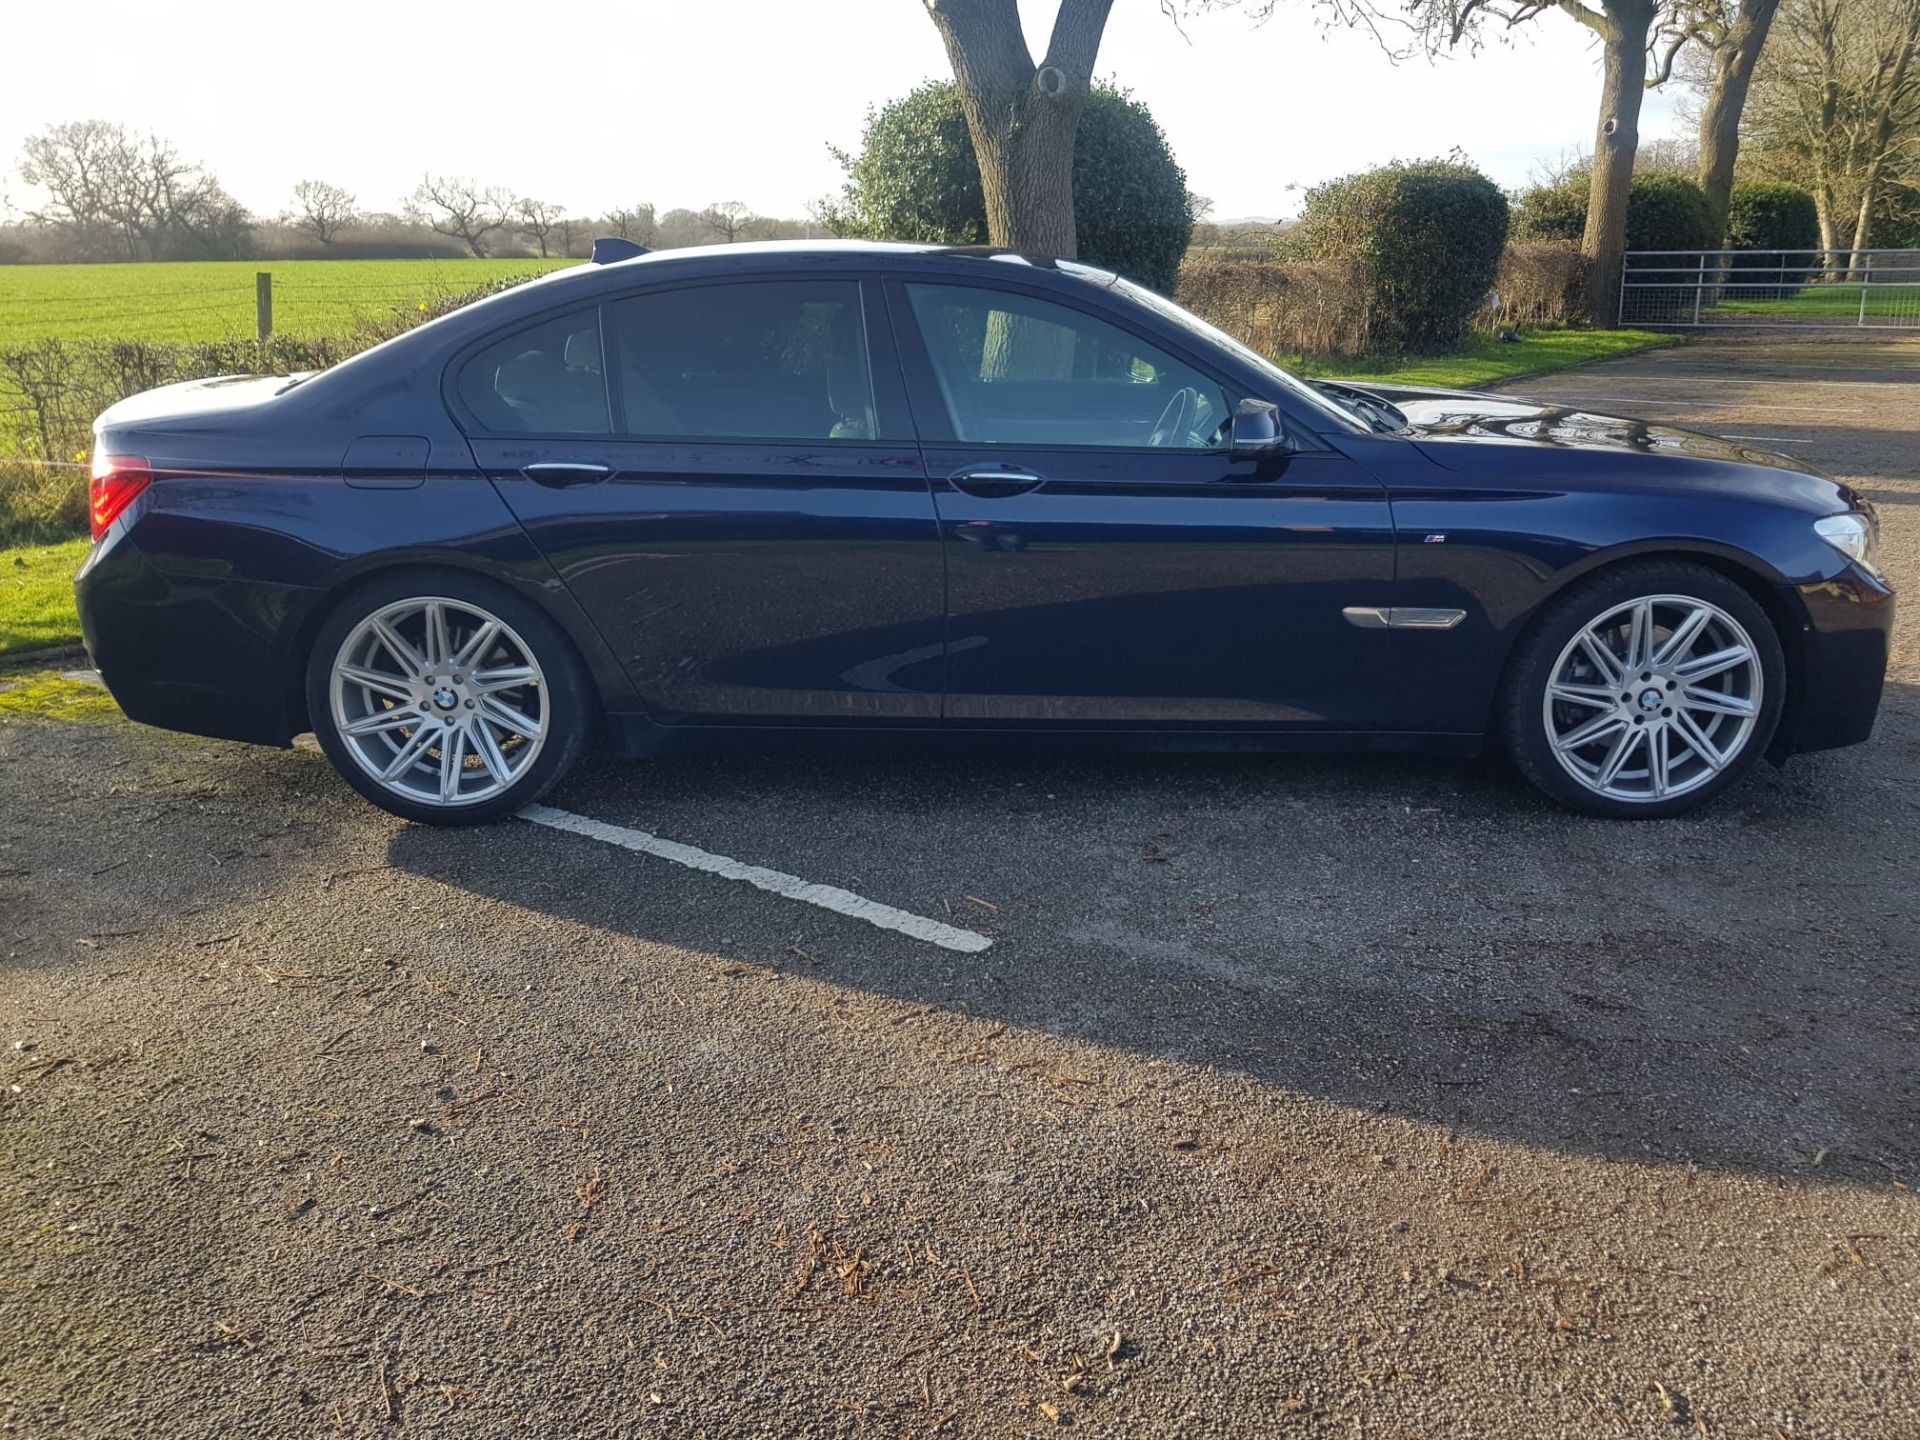 2014 730D M-SPORT SALOON - FULL SERVICE HISTORY - 115K MILES - Image 34 of 43